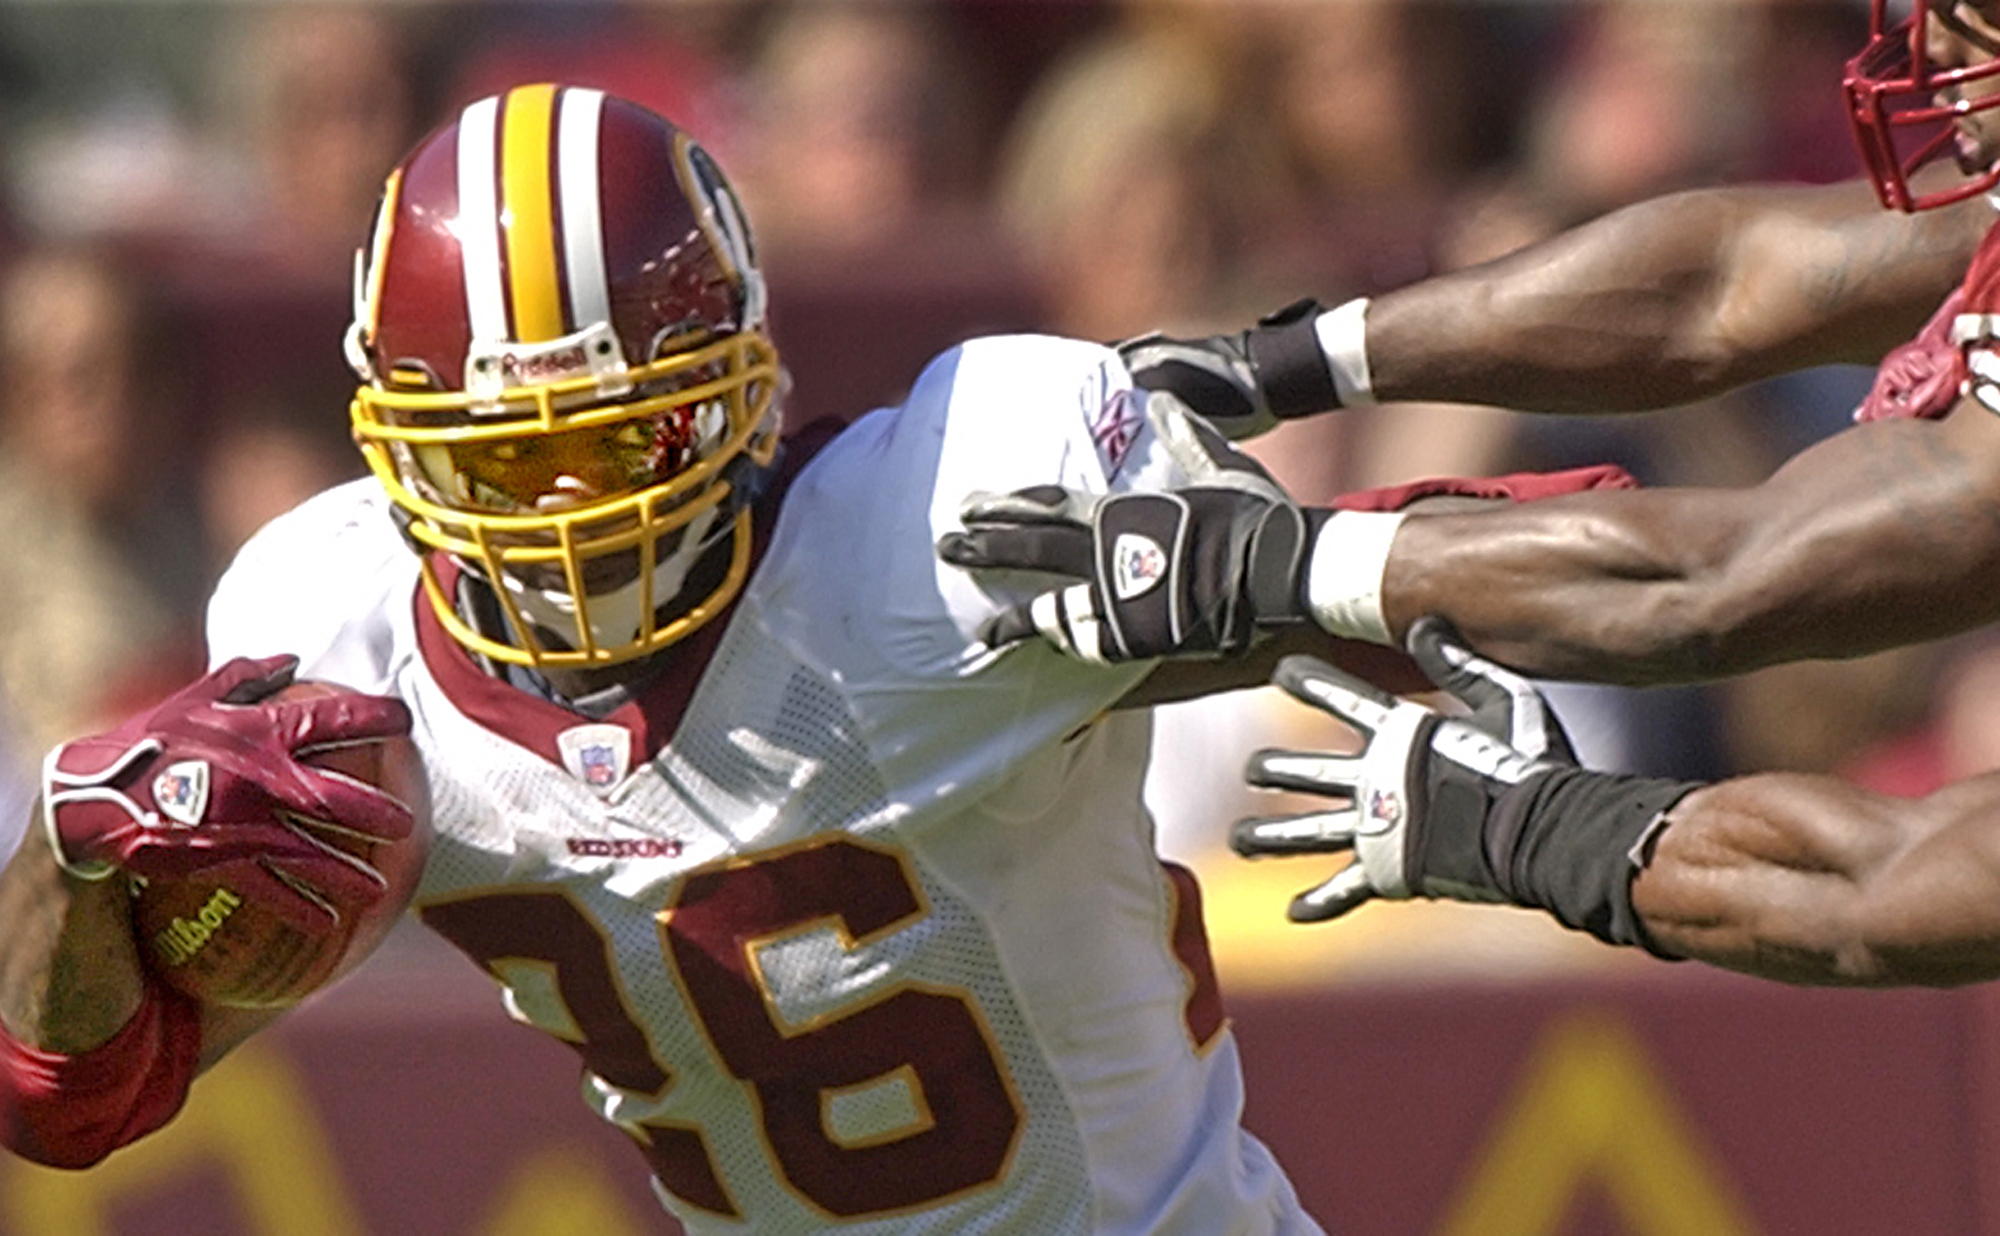 FILE - Washington Redskins' Clinton Portis tries to turn the corner on San Francisco 49ers defenders on Oct. 23, 2005, in Landover, Md., Oct. 23, 2005. A rare star for star trade was made in 2004, when Washington dealt four-time Pro Bowl cornerback Champ Bailey to Denver for Clinton Portis. (Bruce Parker/Richmond Times-Dispatch via AP, File)